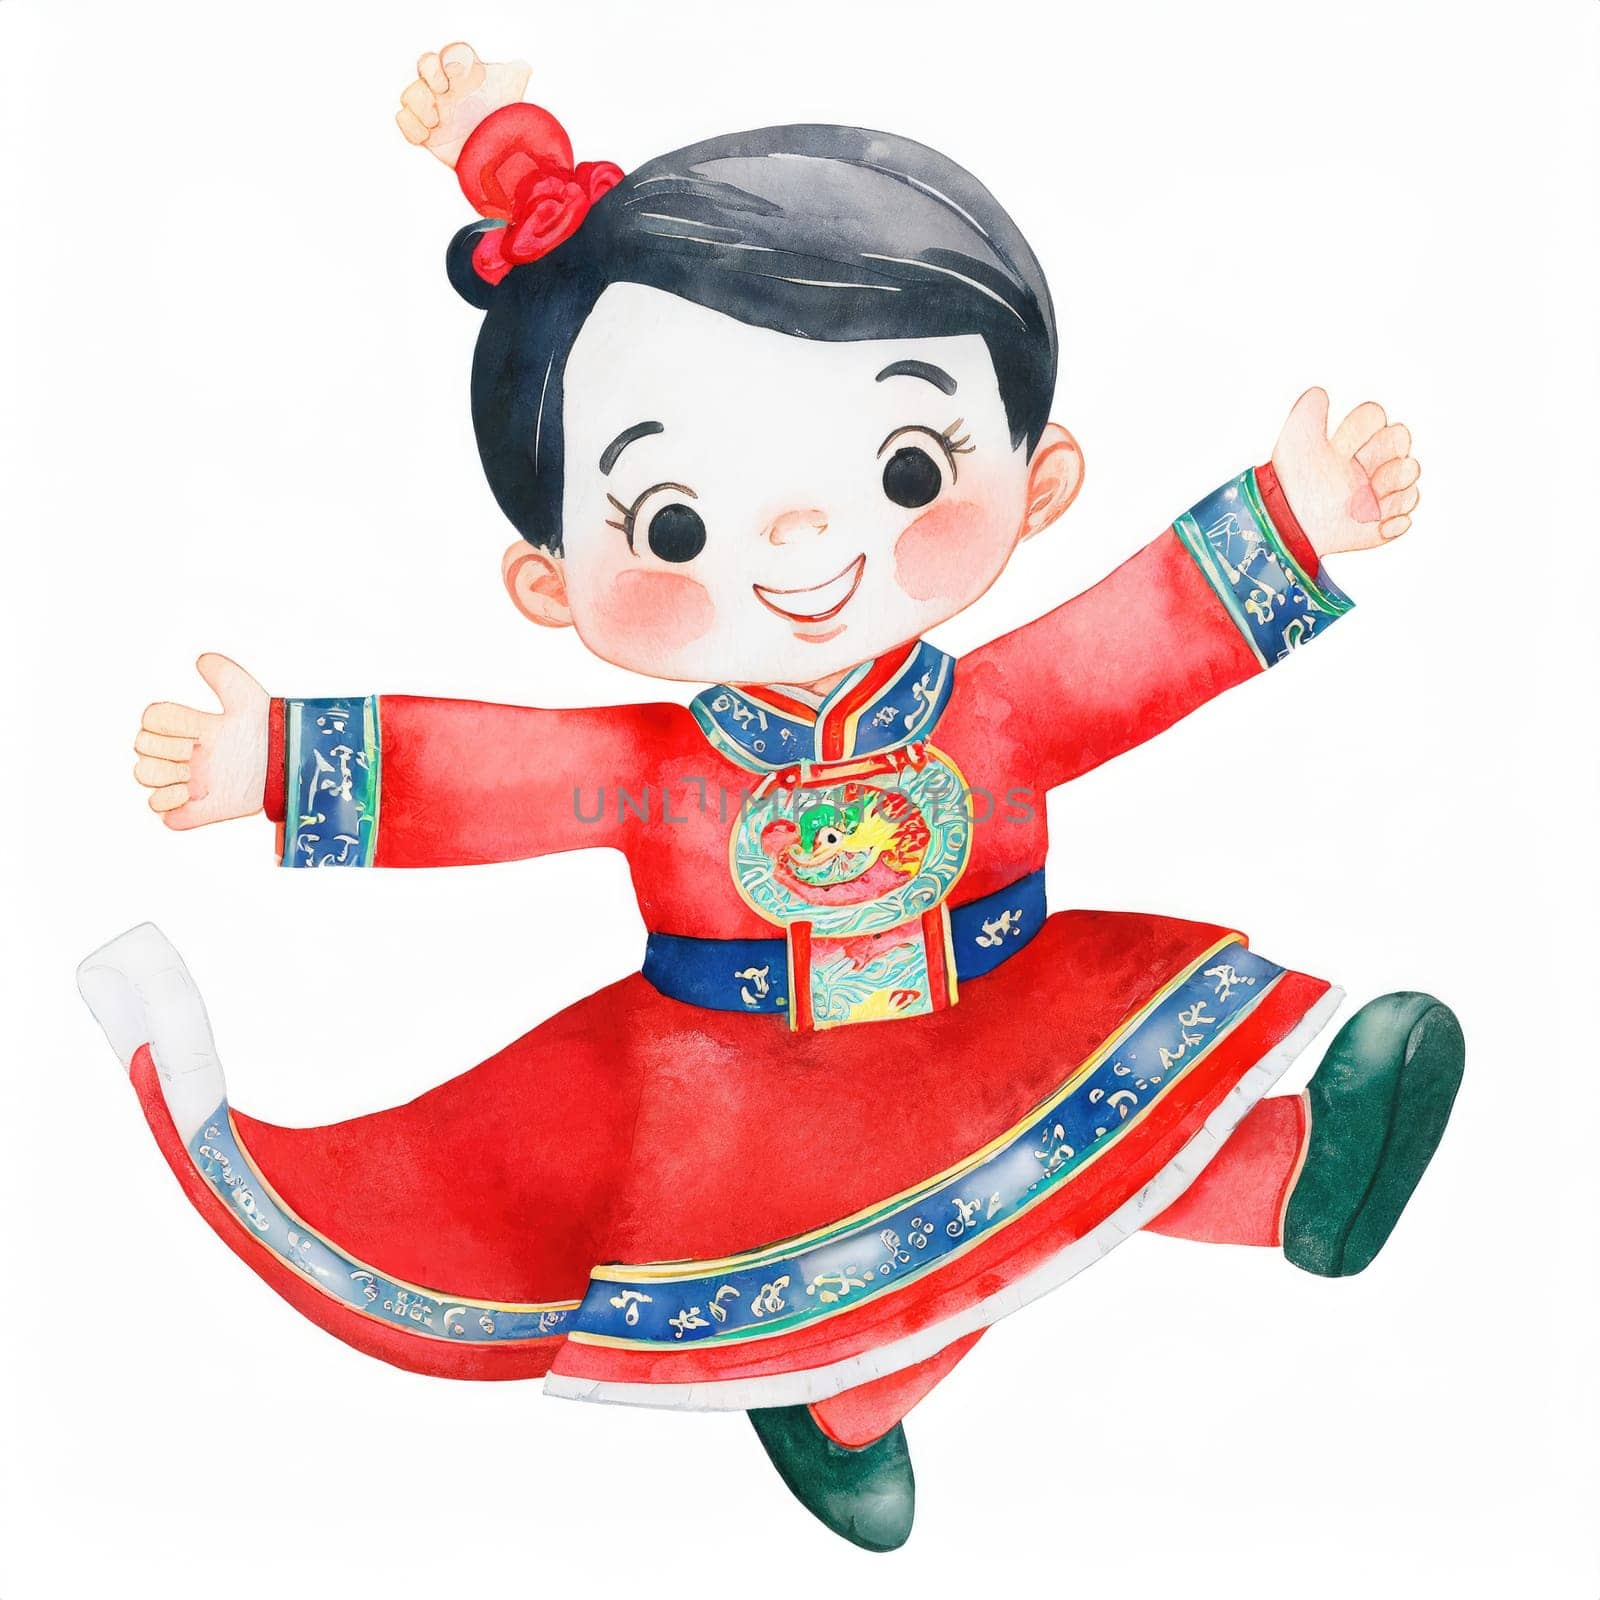 watercolors style, full body jumping action of cartoon cute Potrait kid character with Chiness dress.